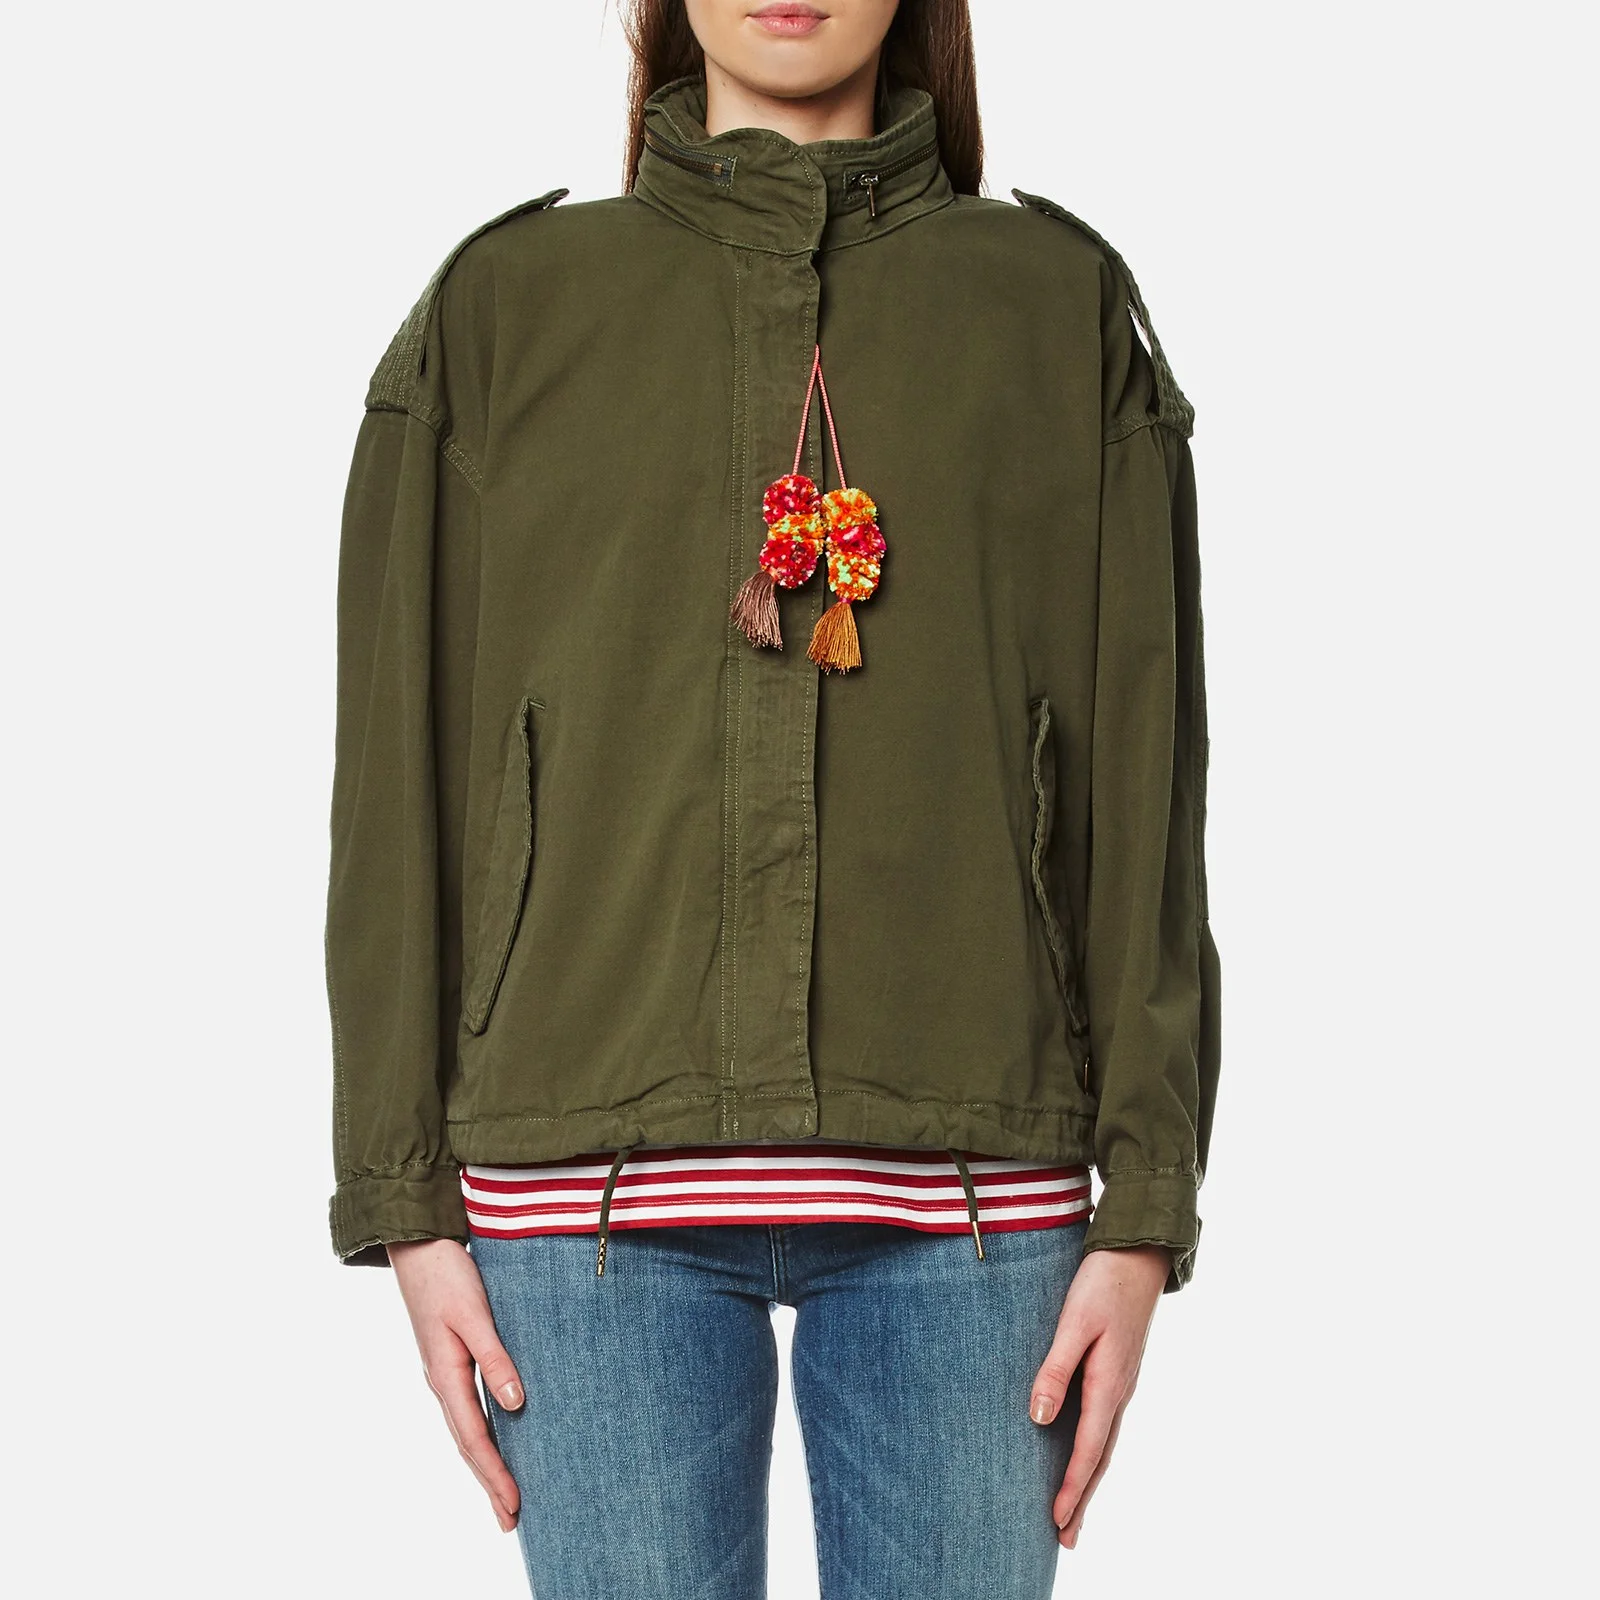 Maison Scotch Women's Relaxed Fit Army Jacket with Hidden Hood - Army Image 1